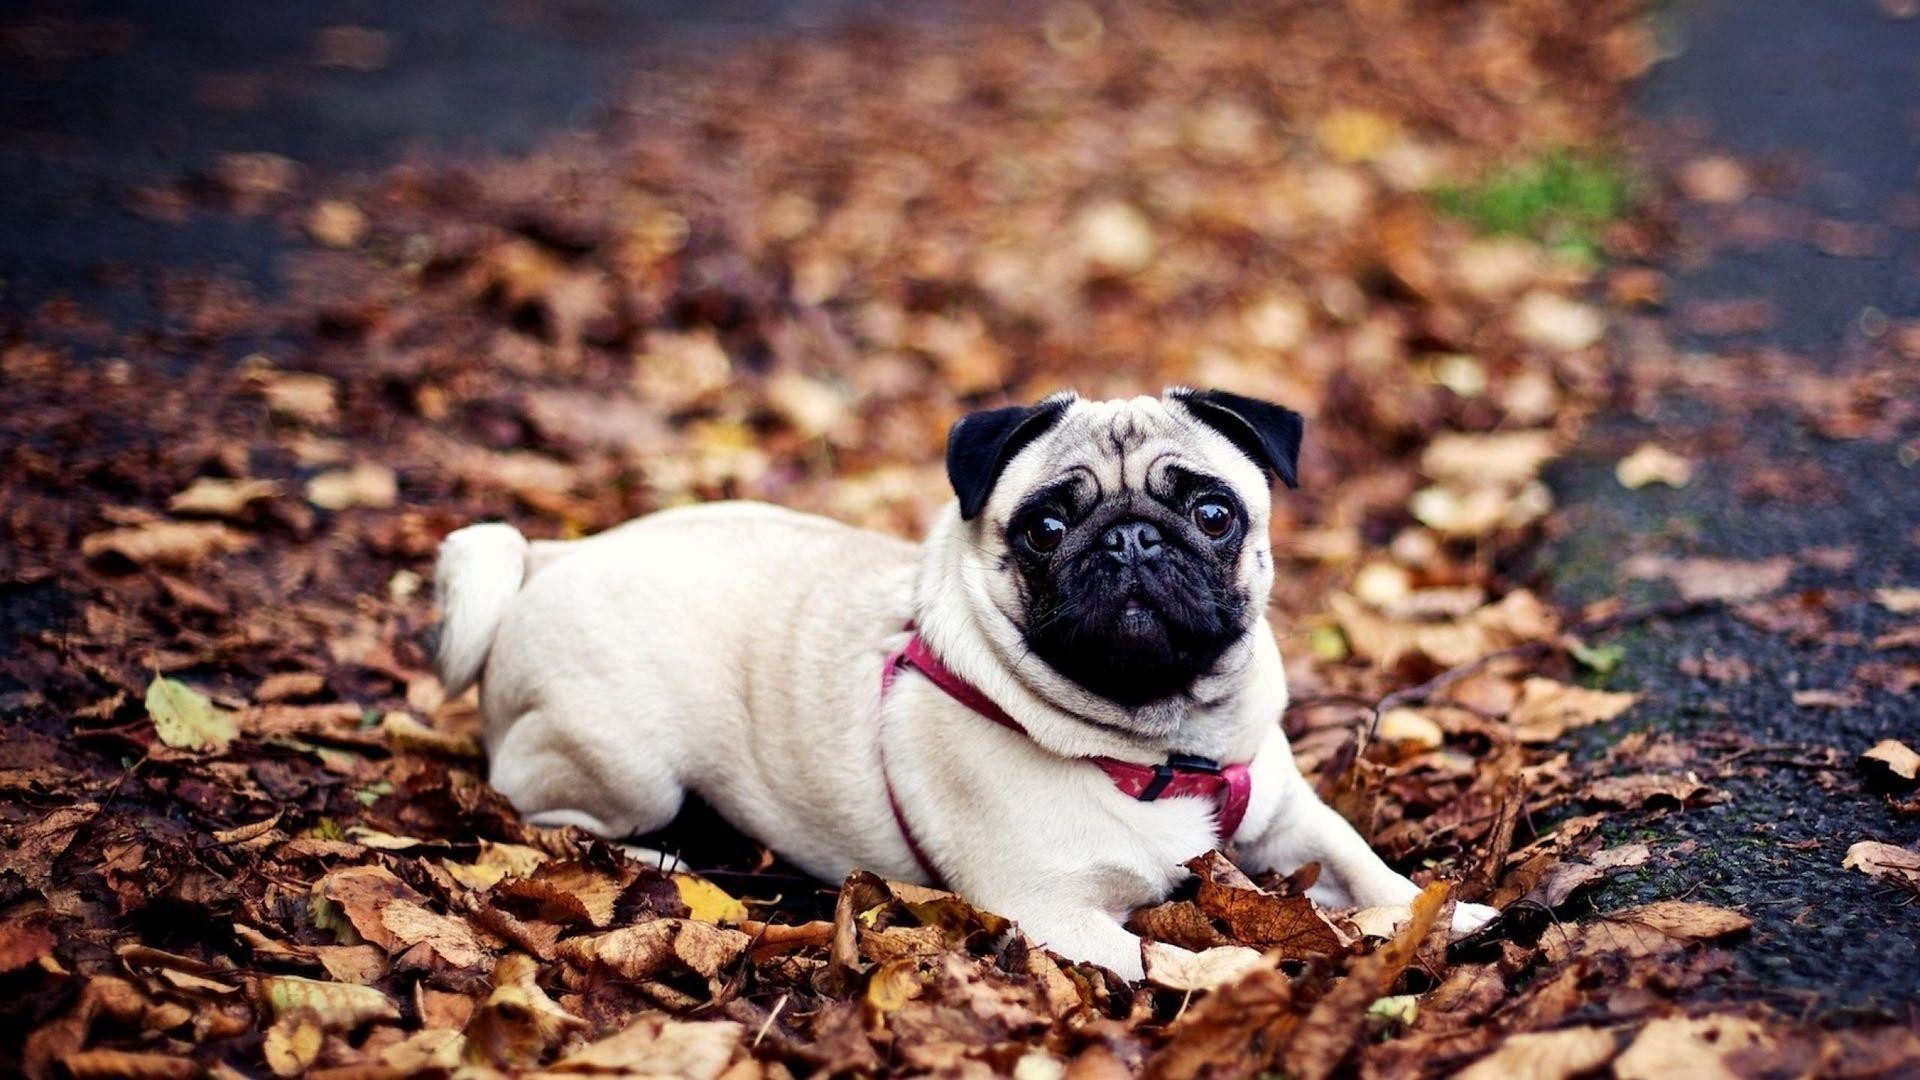 1920x1080 Pug Dog Wallpapers | Pug Dog Pictures Free Download | Cool Wallpapers